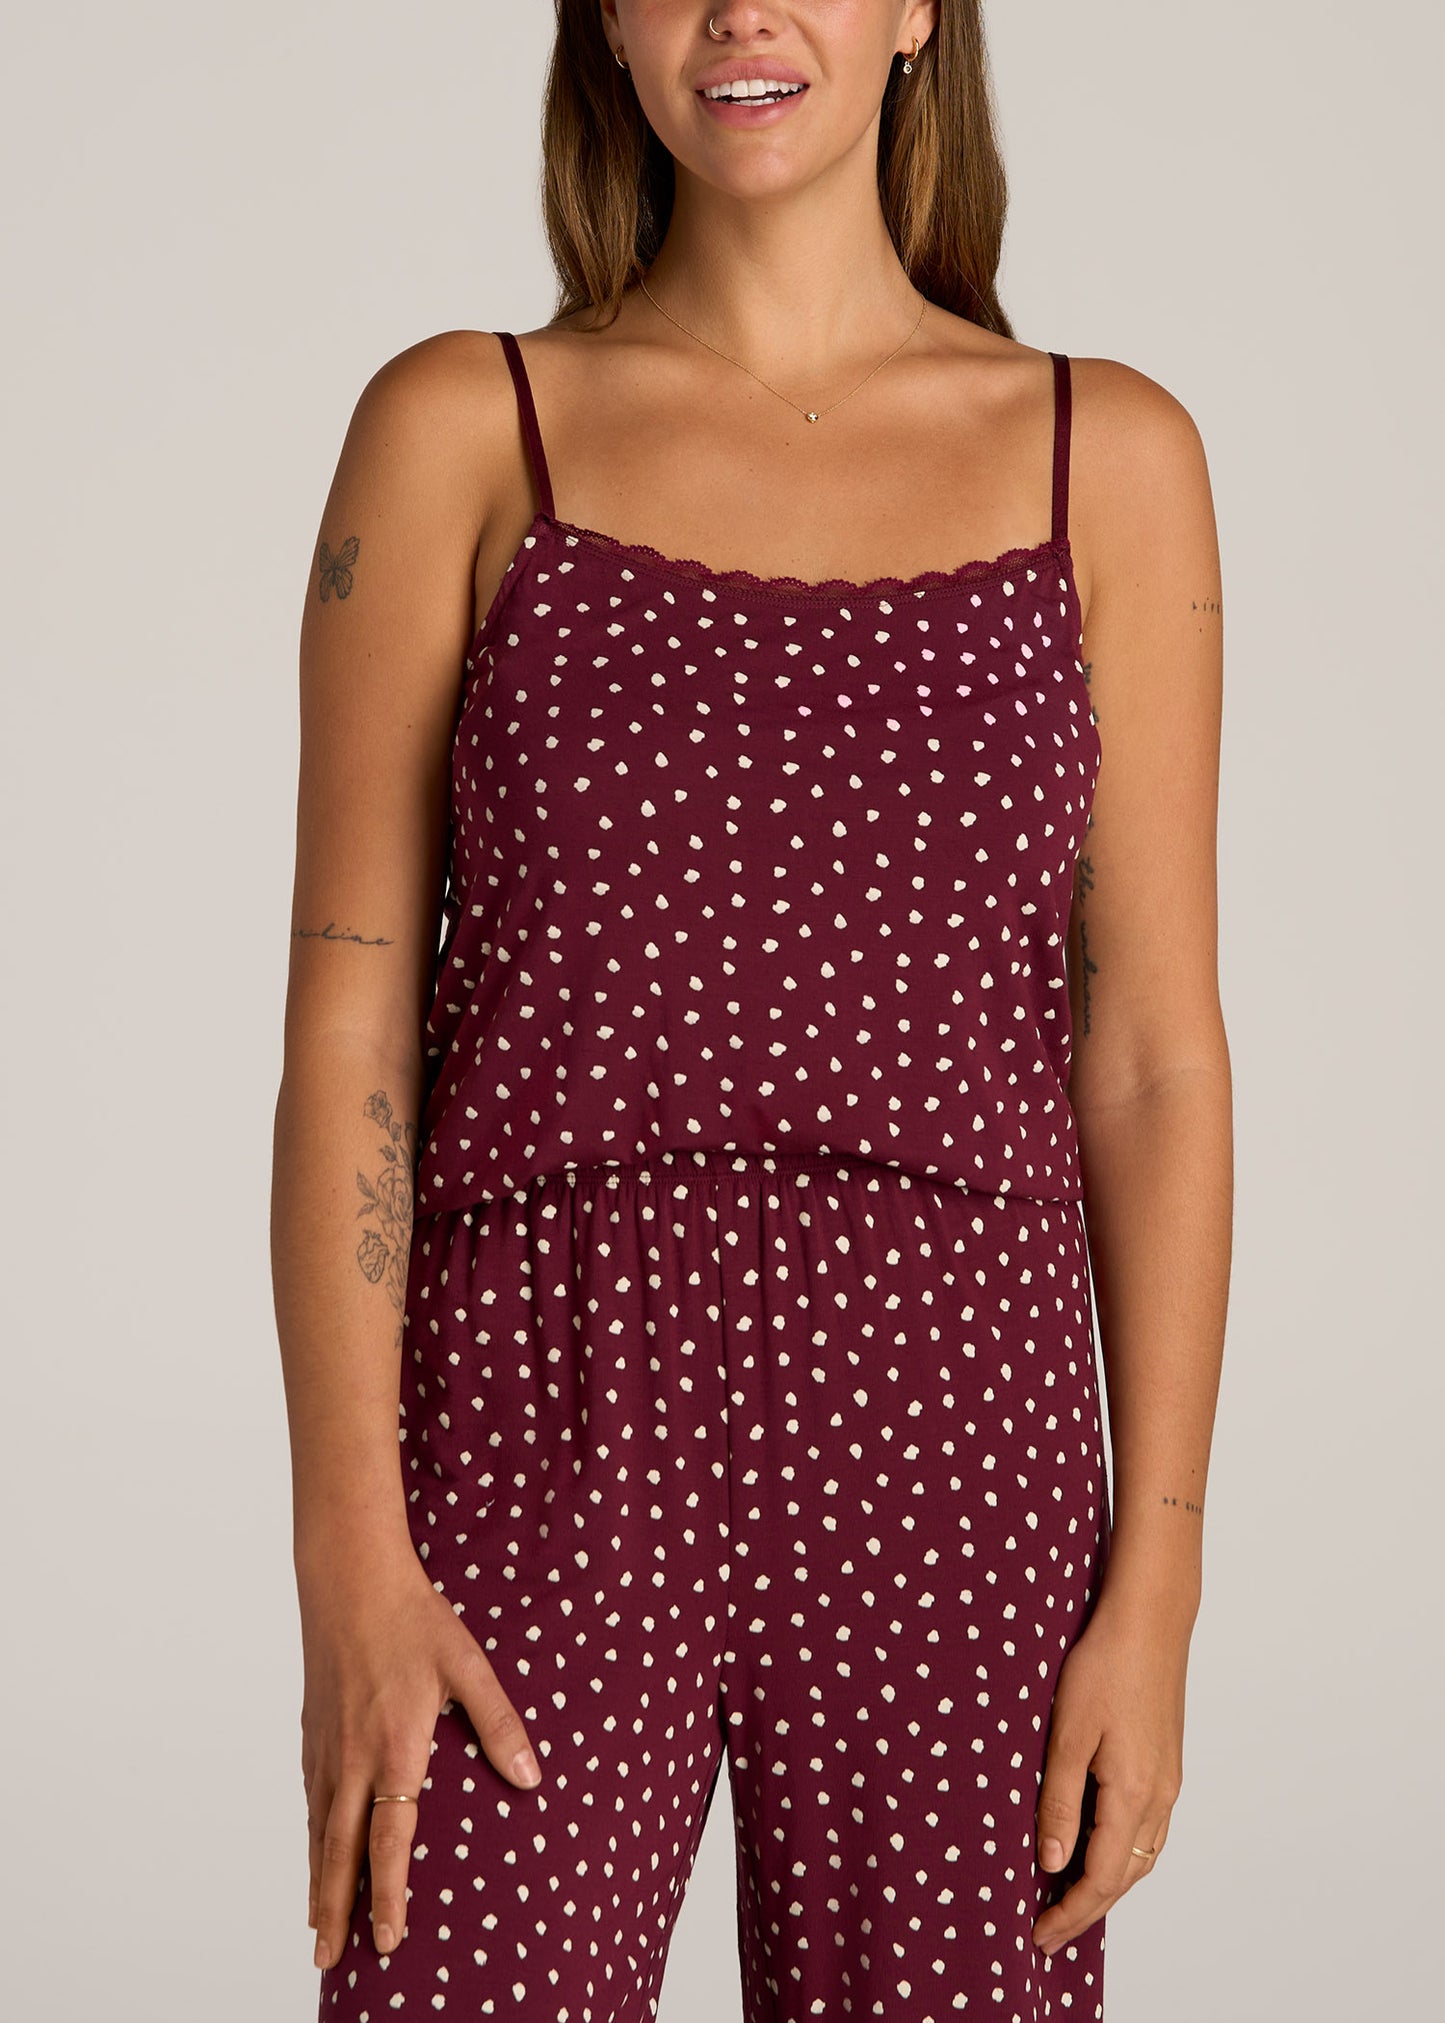 Lace Camisole Tank Top for Tall Women in Dark Cherry Cloud Print